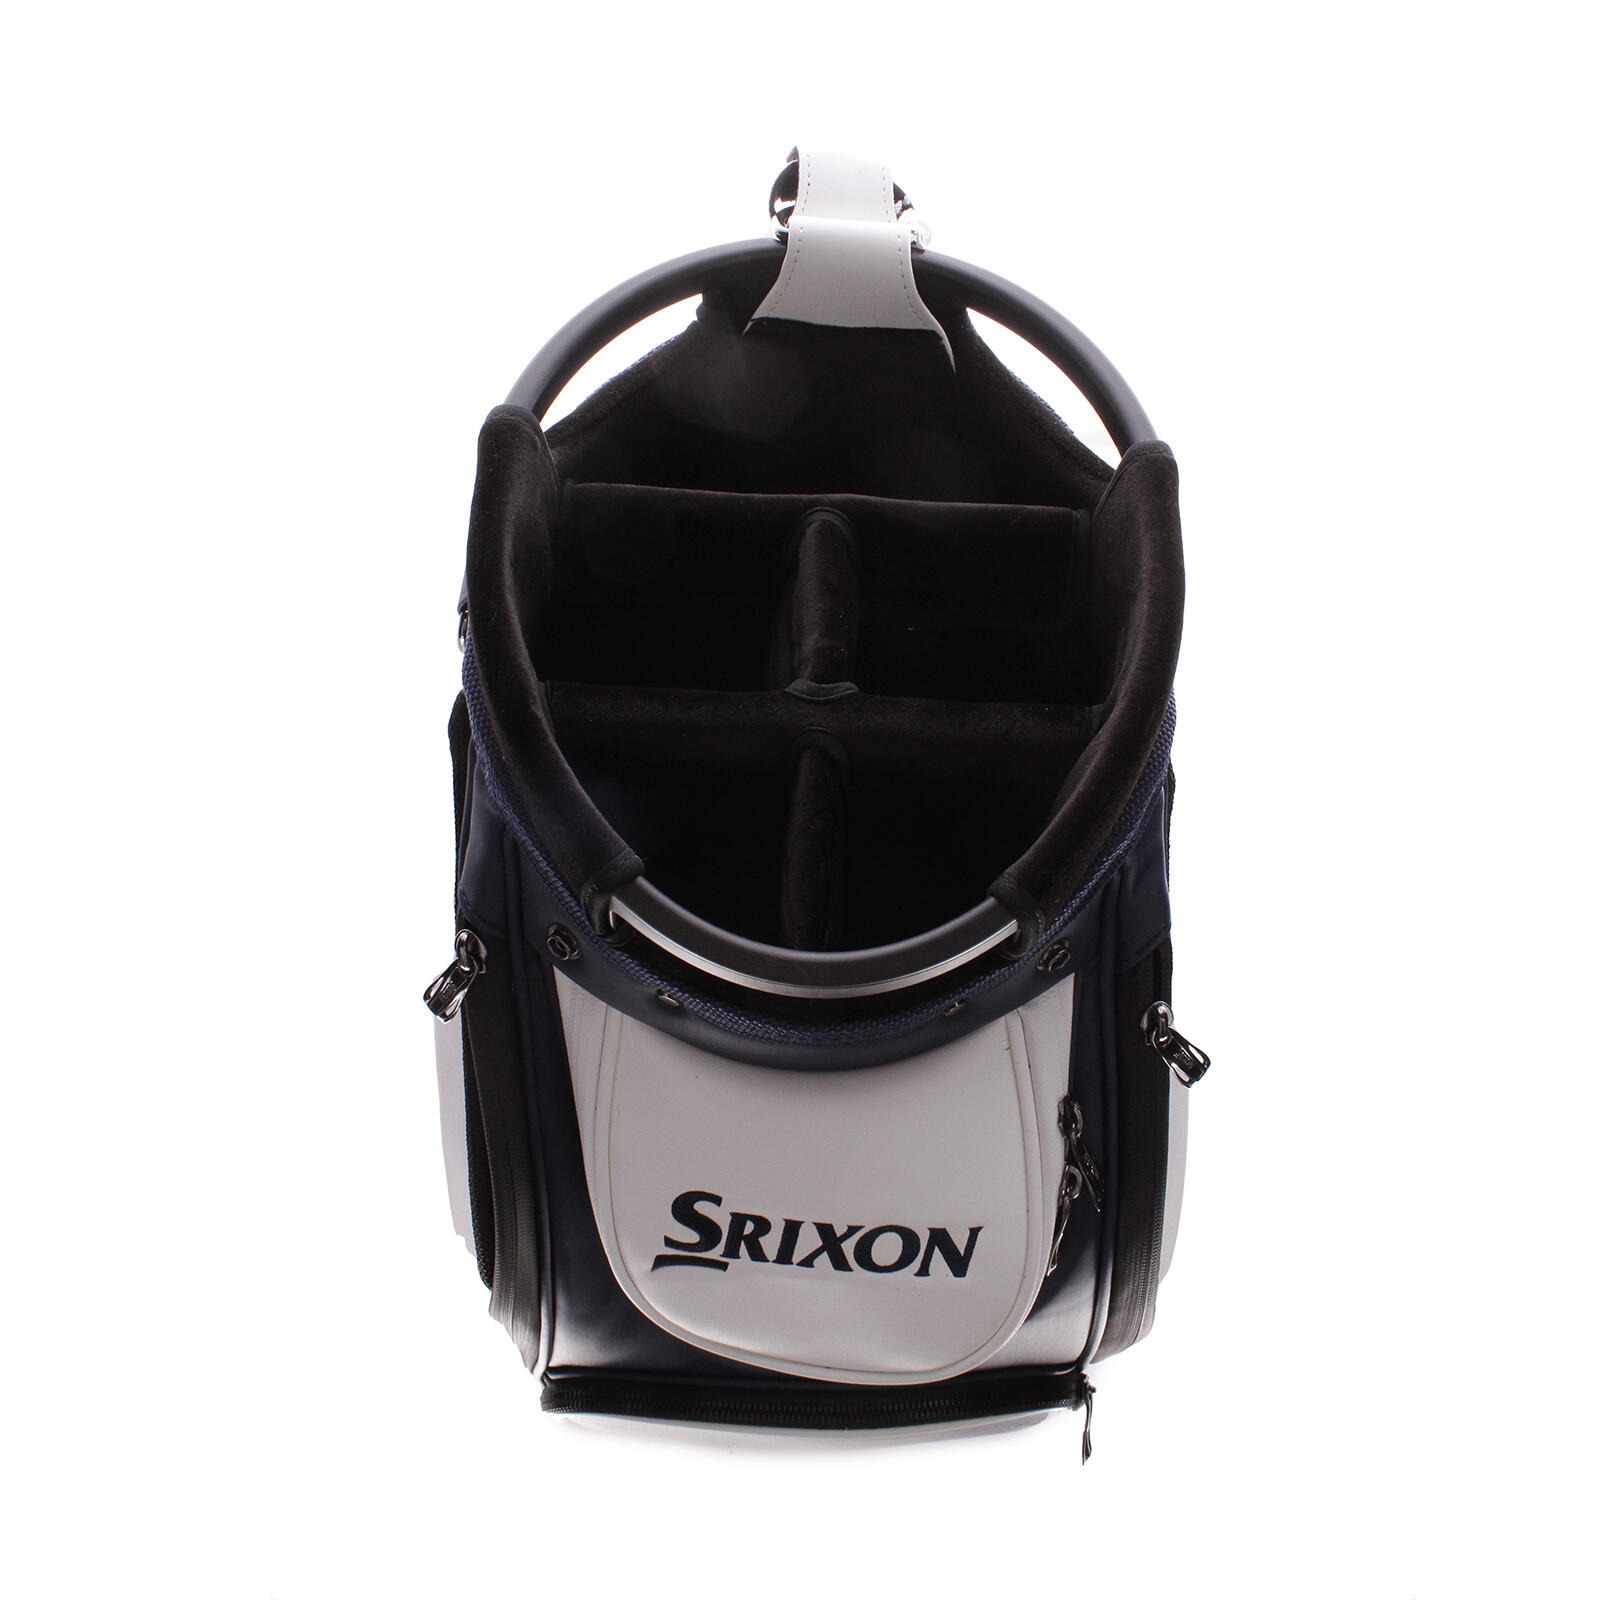 USED - Srixon Staff Tour Bag with 5 Way Divider Top and Single Strap - GRADE B 2/5